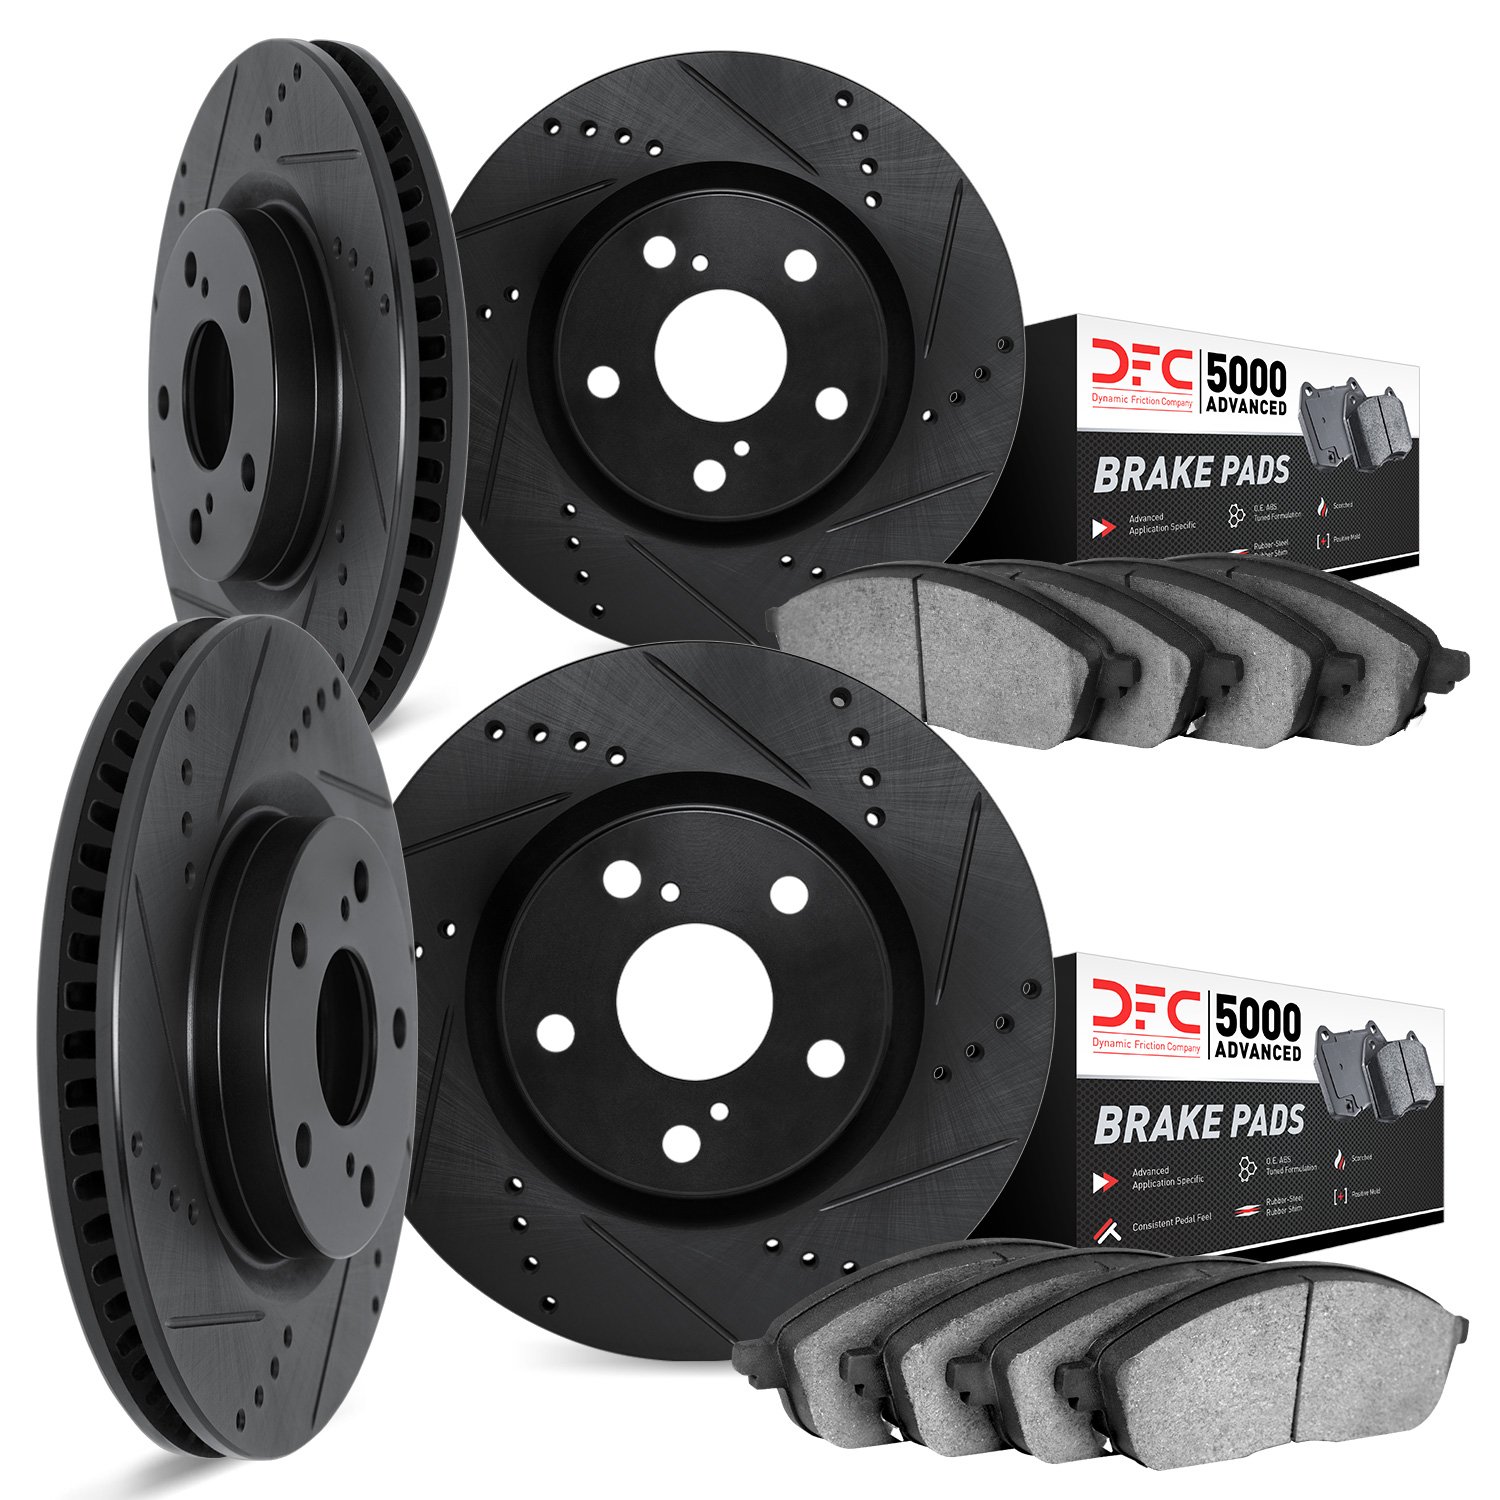 8504-31019 Drilled/Slotted Brake Rotors w/5000 Advanced Brake Pads Kit [Black], 2006-2007 BMW, Position: Front and Rear